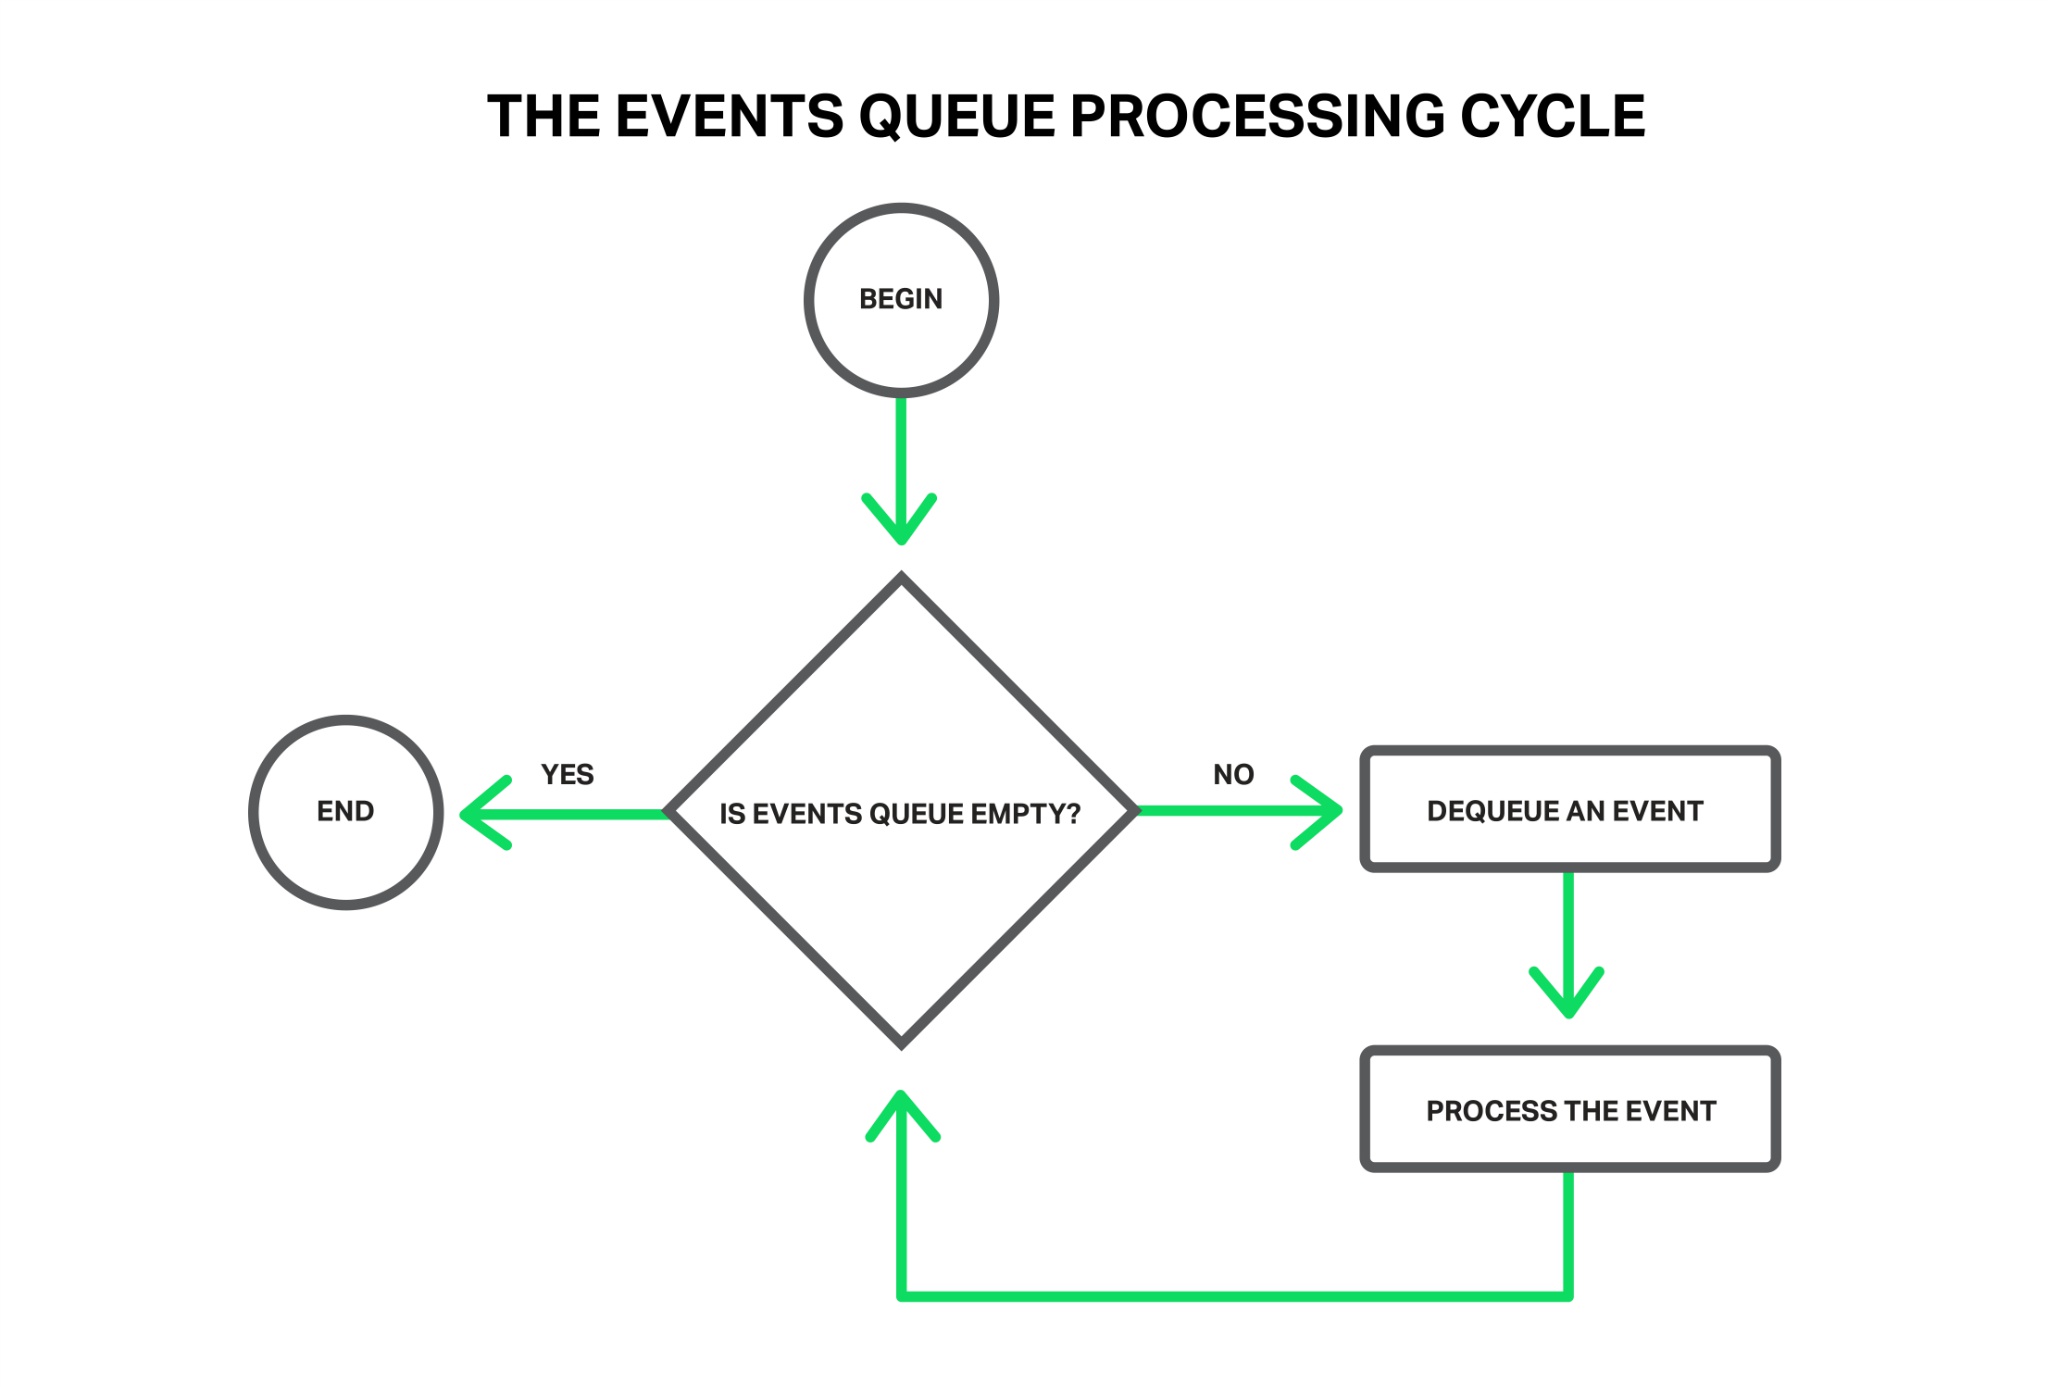 Events Queue Processing Cycle